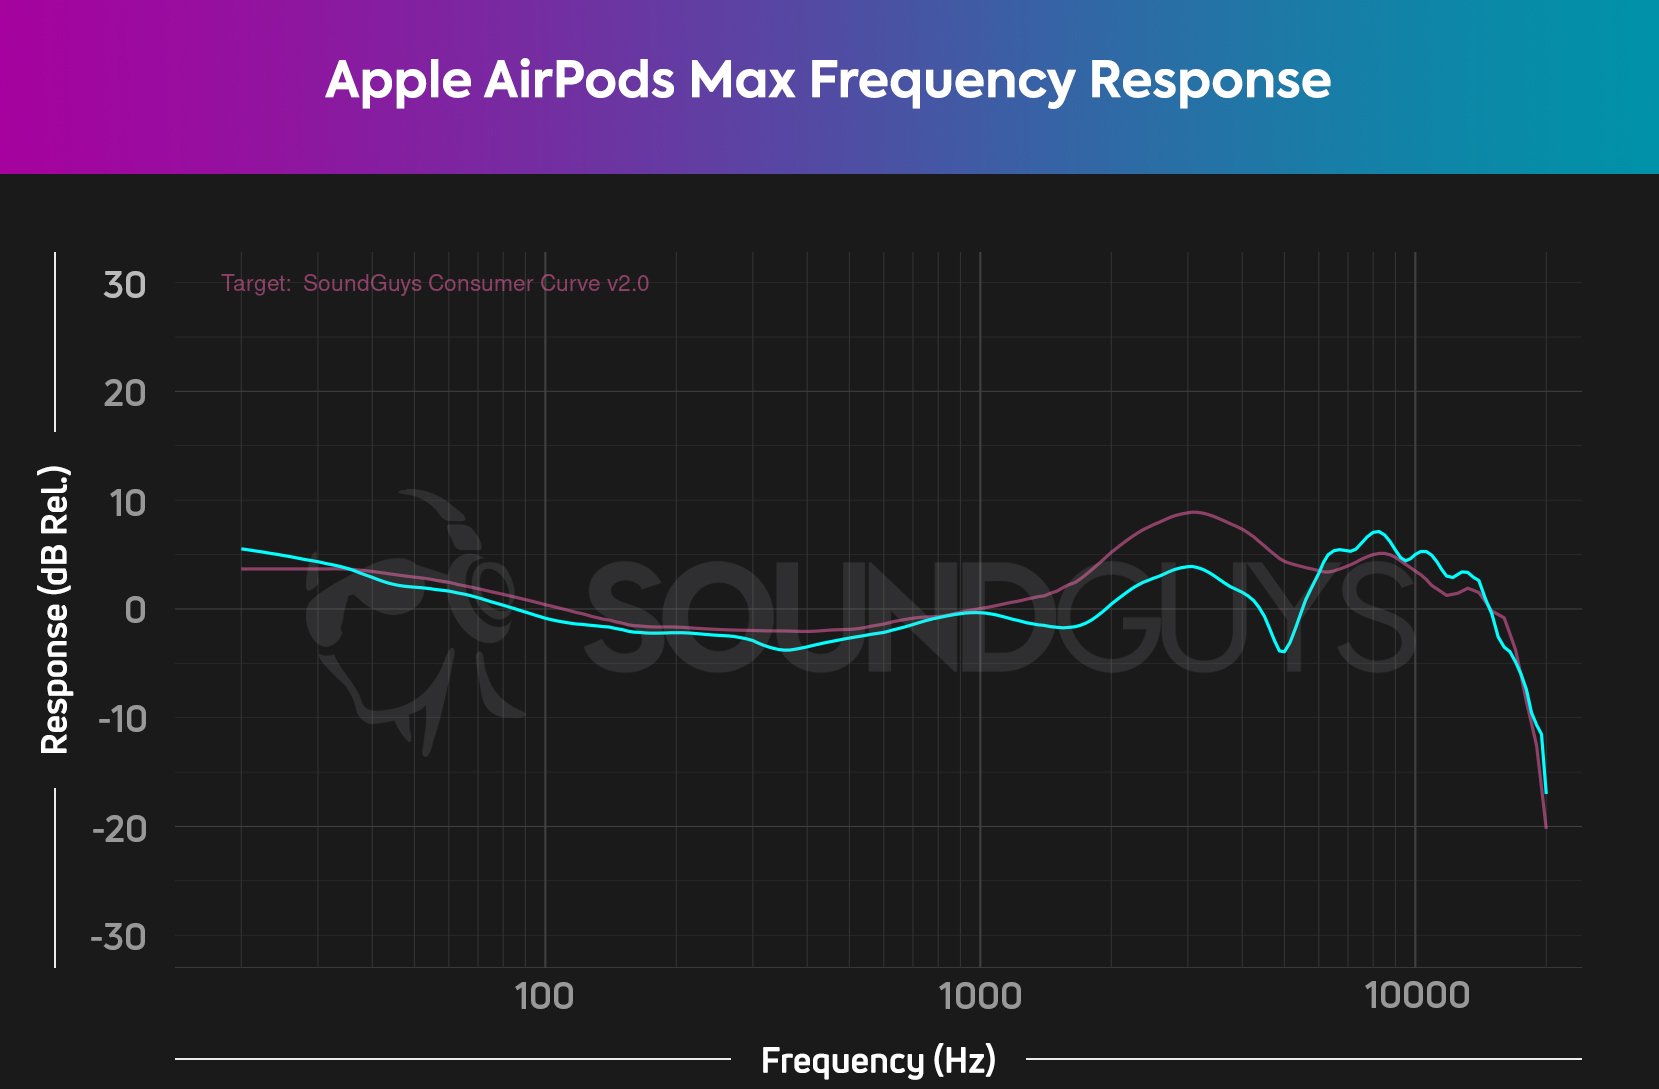 Apple AirPods Max frequency response chart.